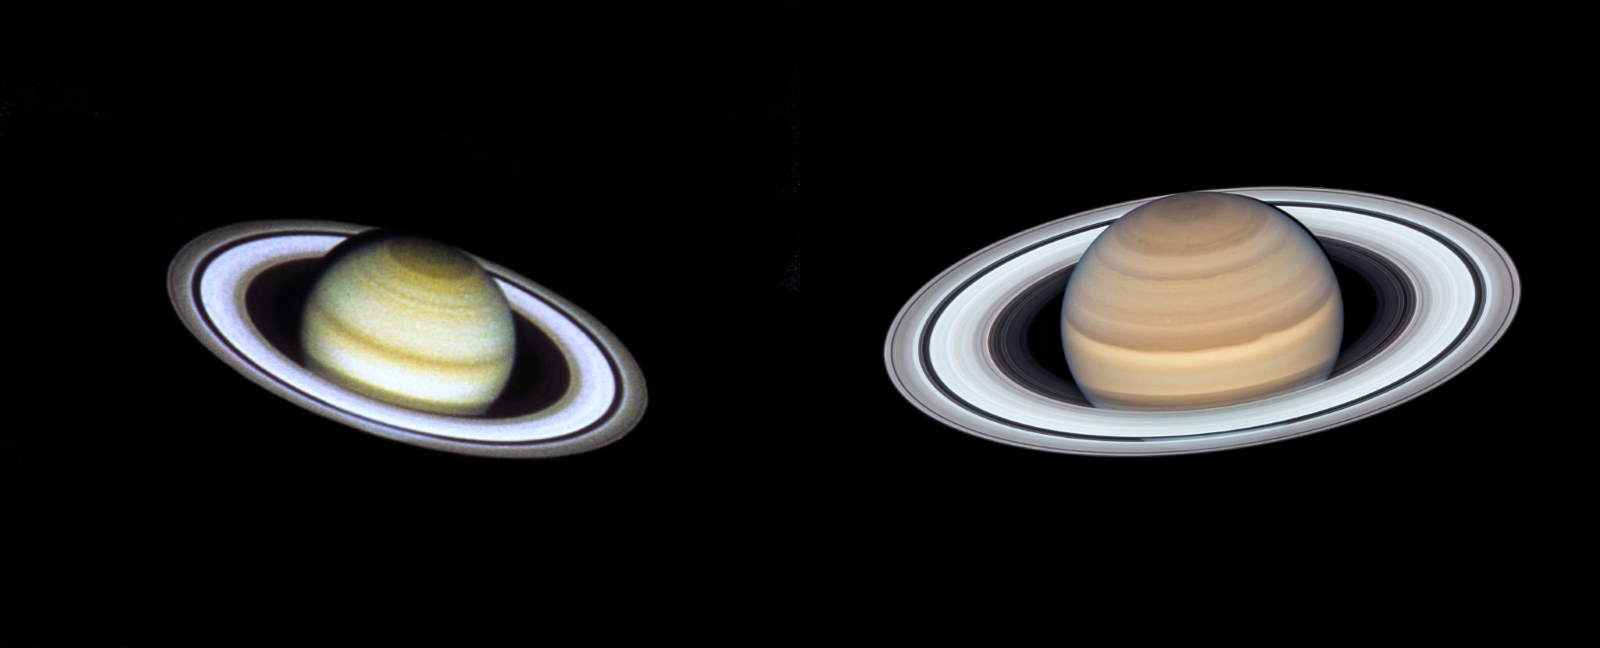 Hubble images of Saturn (1990, 2019)